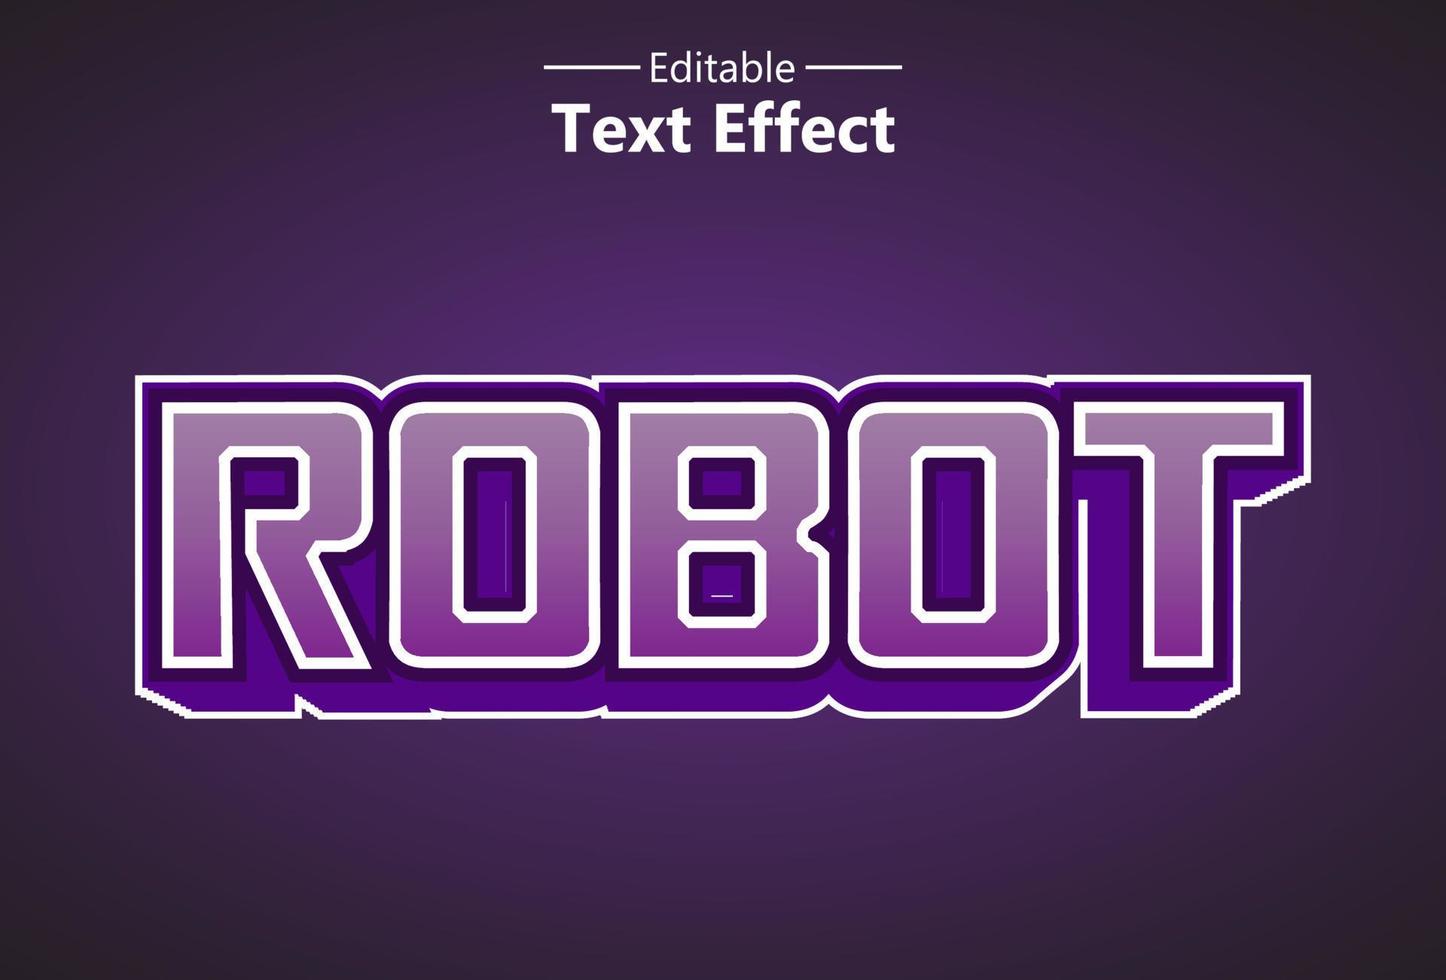 robot text effect with purple color for brand and logo. vector